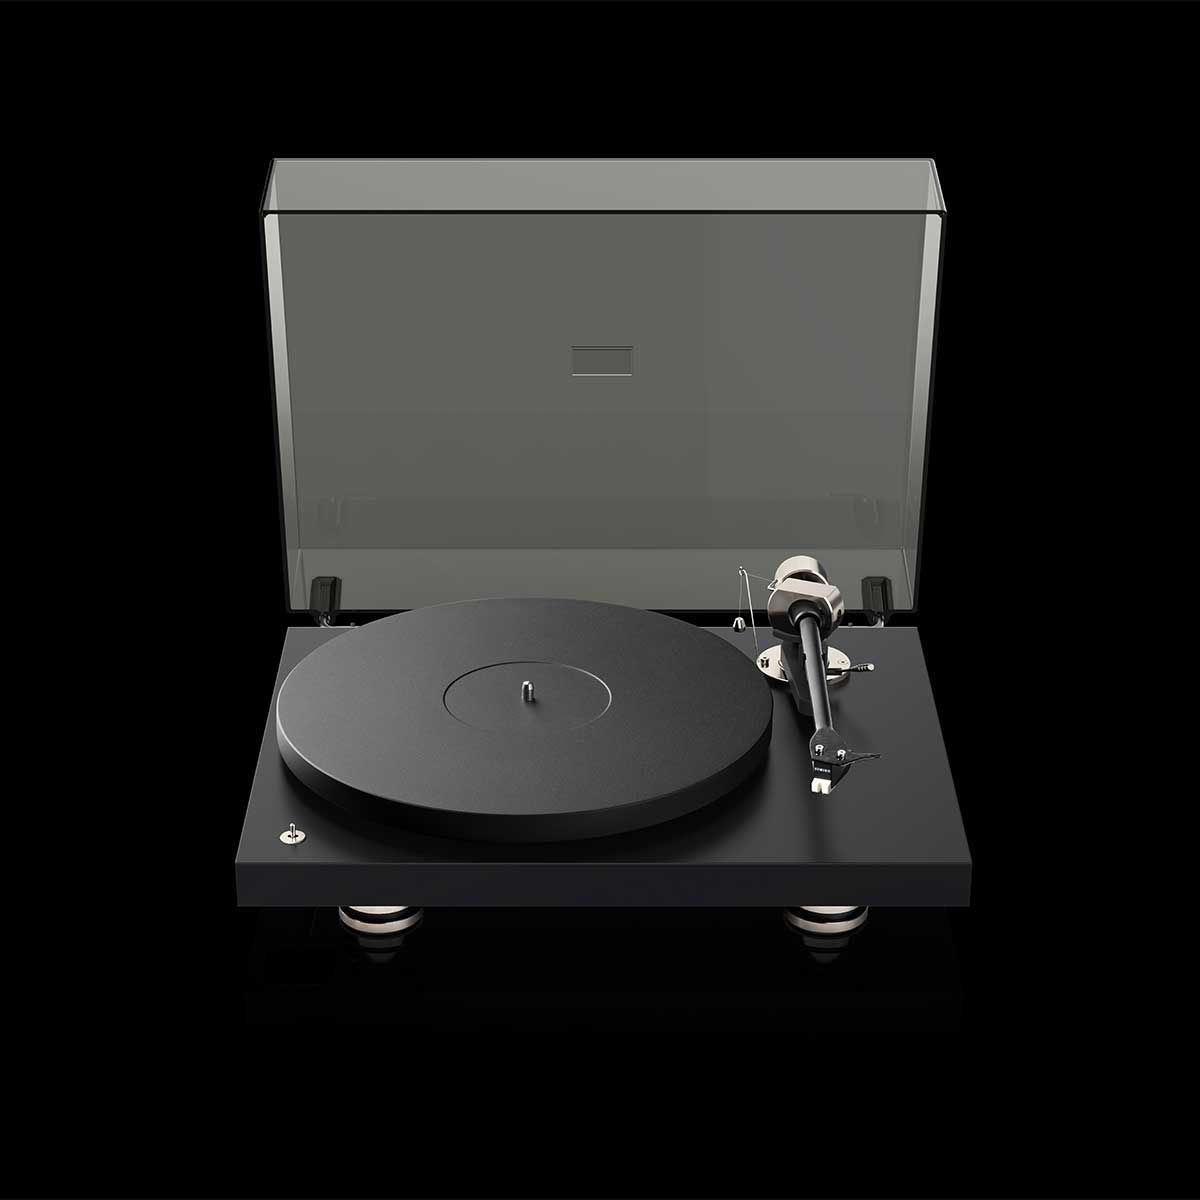 Pro-Ject Debut PRO Turntable, Satin Black, front top view with dustcover attached on black background